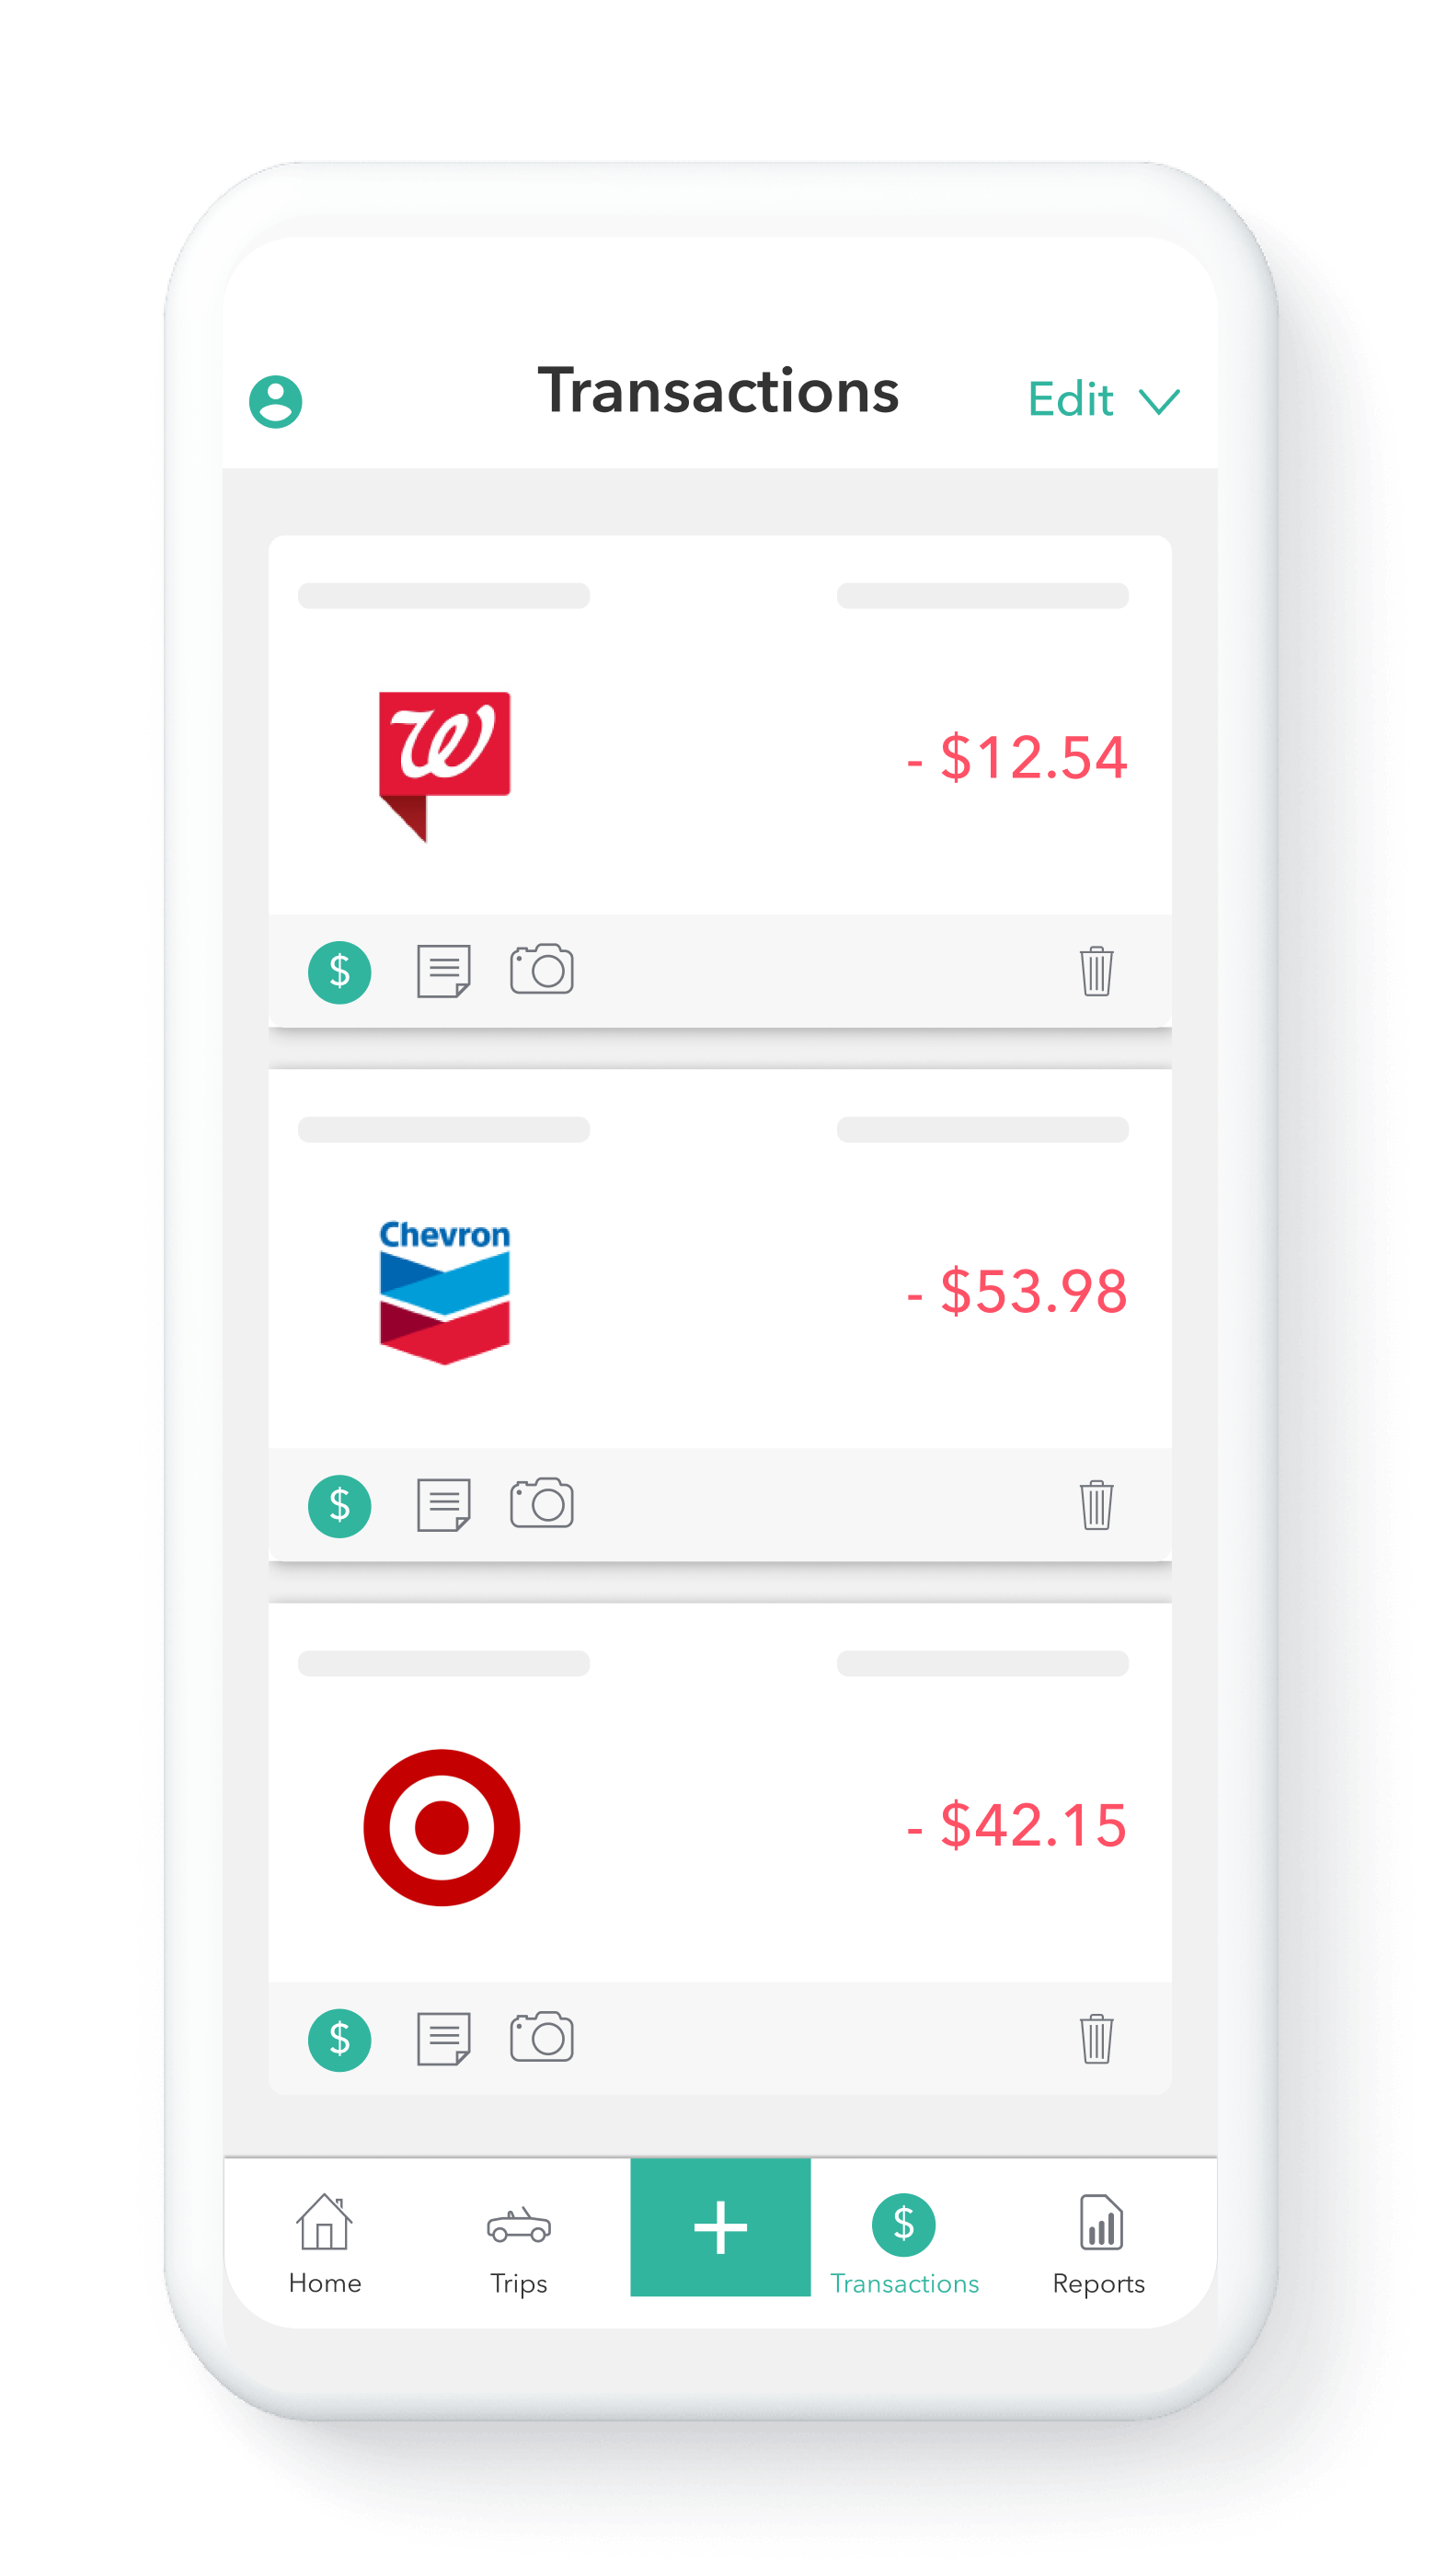 Upload receipts in the app to track expenses too